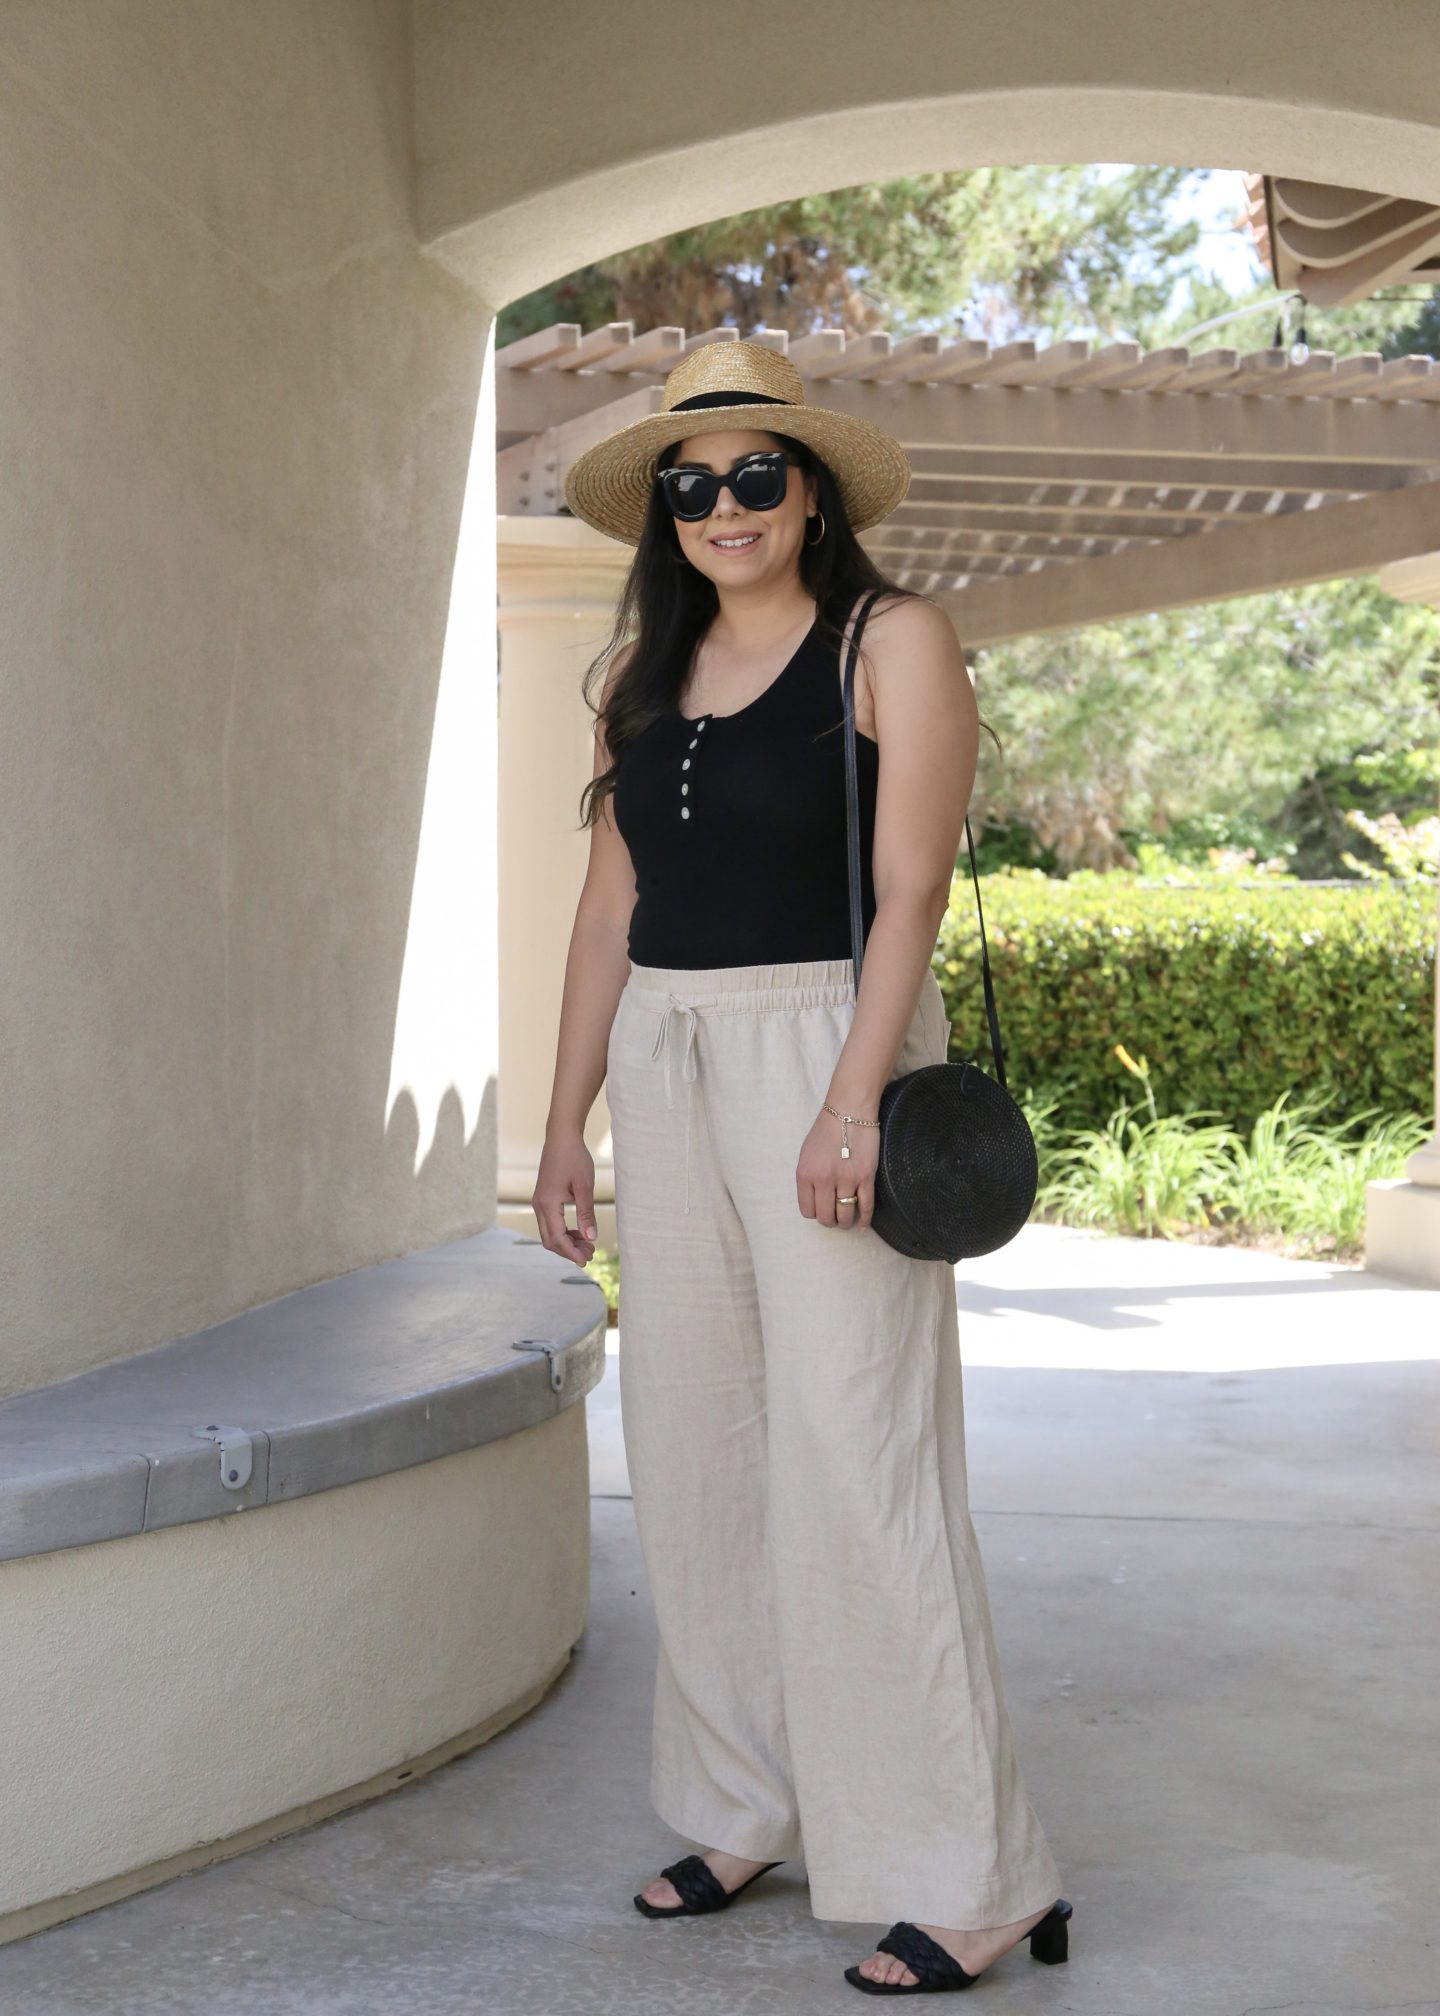 Black Wide Leg Pants Summer Outfits (30 ideas & outfits)